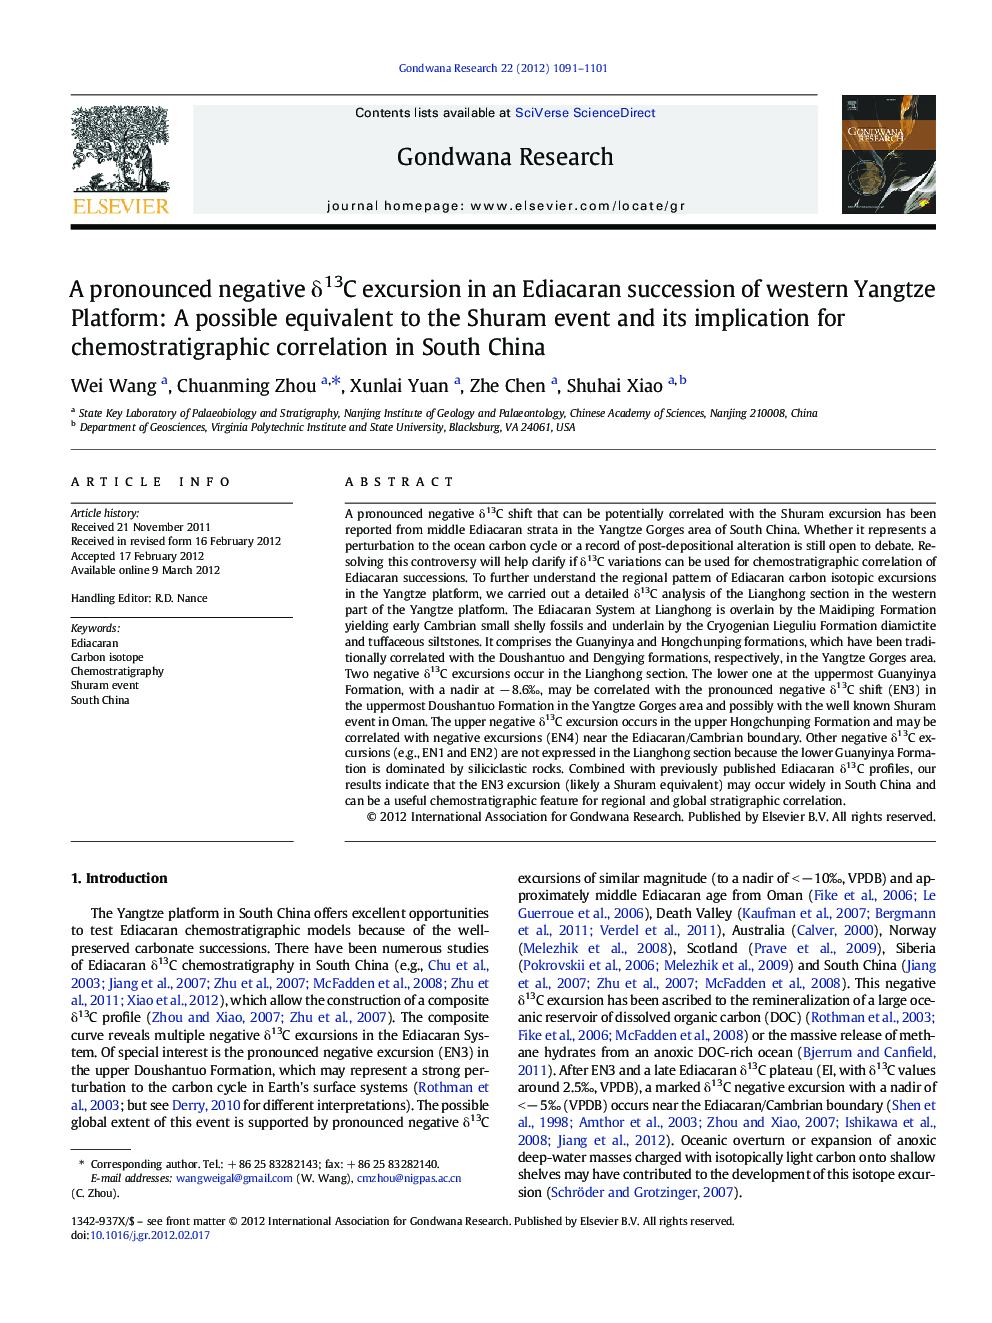 A pronounced negative δ13C excursion in an Ediacaran succession of western Yangtze Platform: A possible equivalent to the Shuram event and its implication for chemostratigraphic correlation in South China